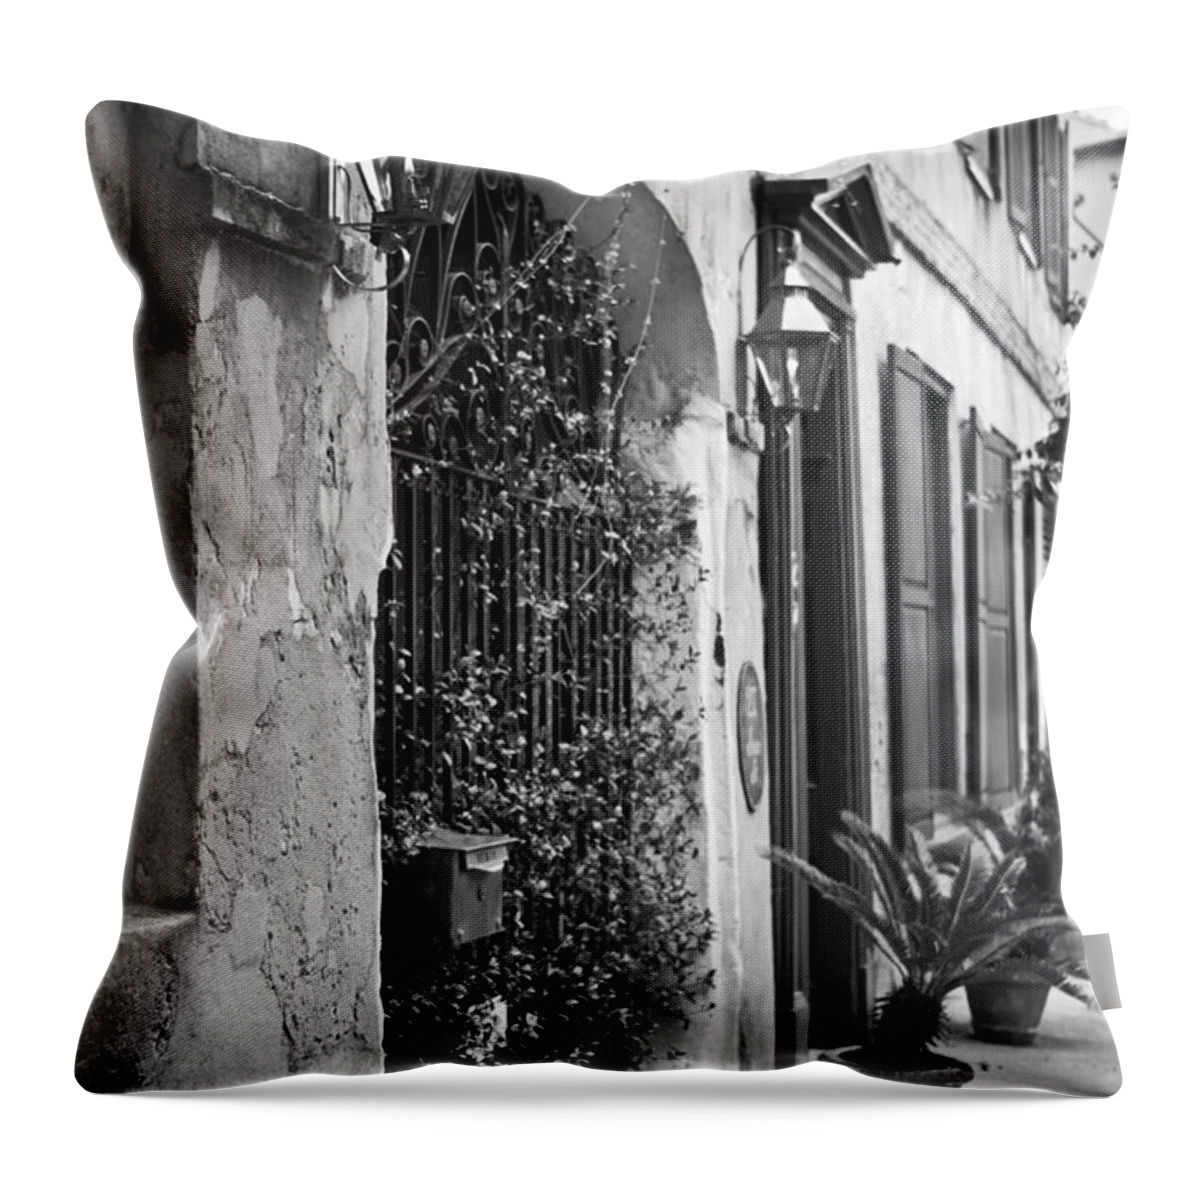 Wrought Iron Entry Downtown Charleston South Carolina Throw Pillow featuring the photograph Wrought Iron Entry by Dustin K Ryan